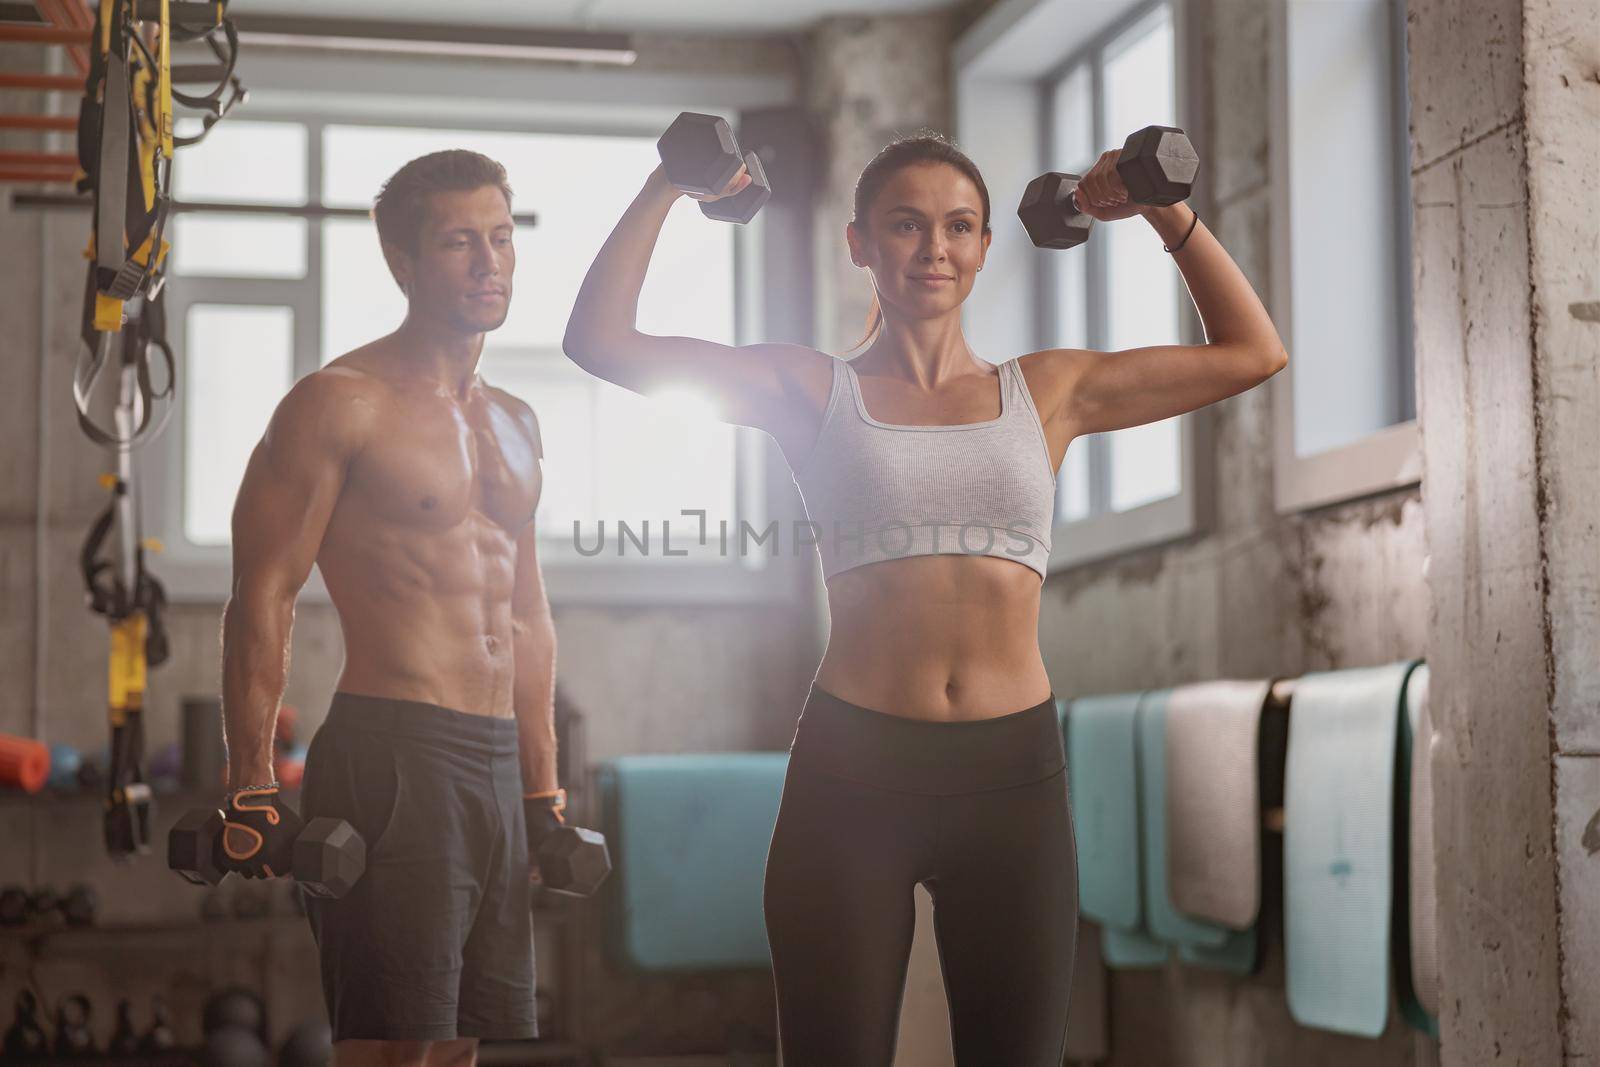 Slender pretty woman holding dumbbells and raising them, performing a sports exercise with strong man in the gym